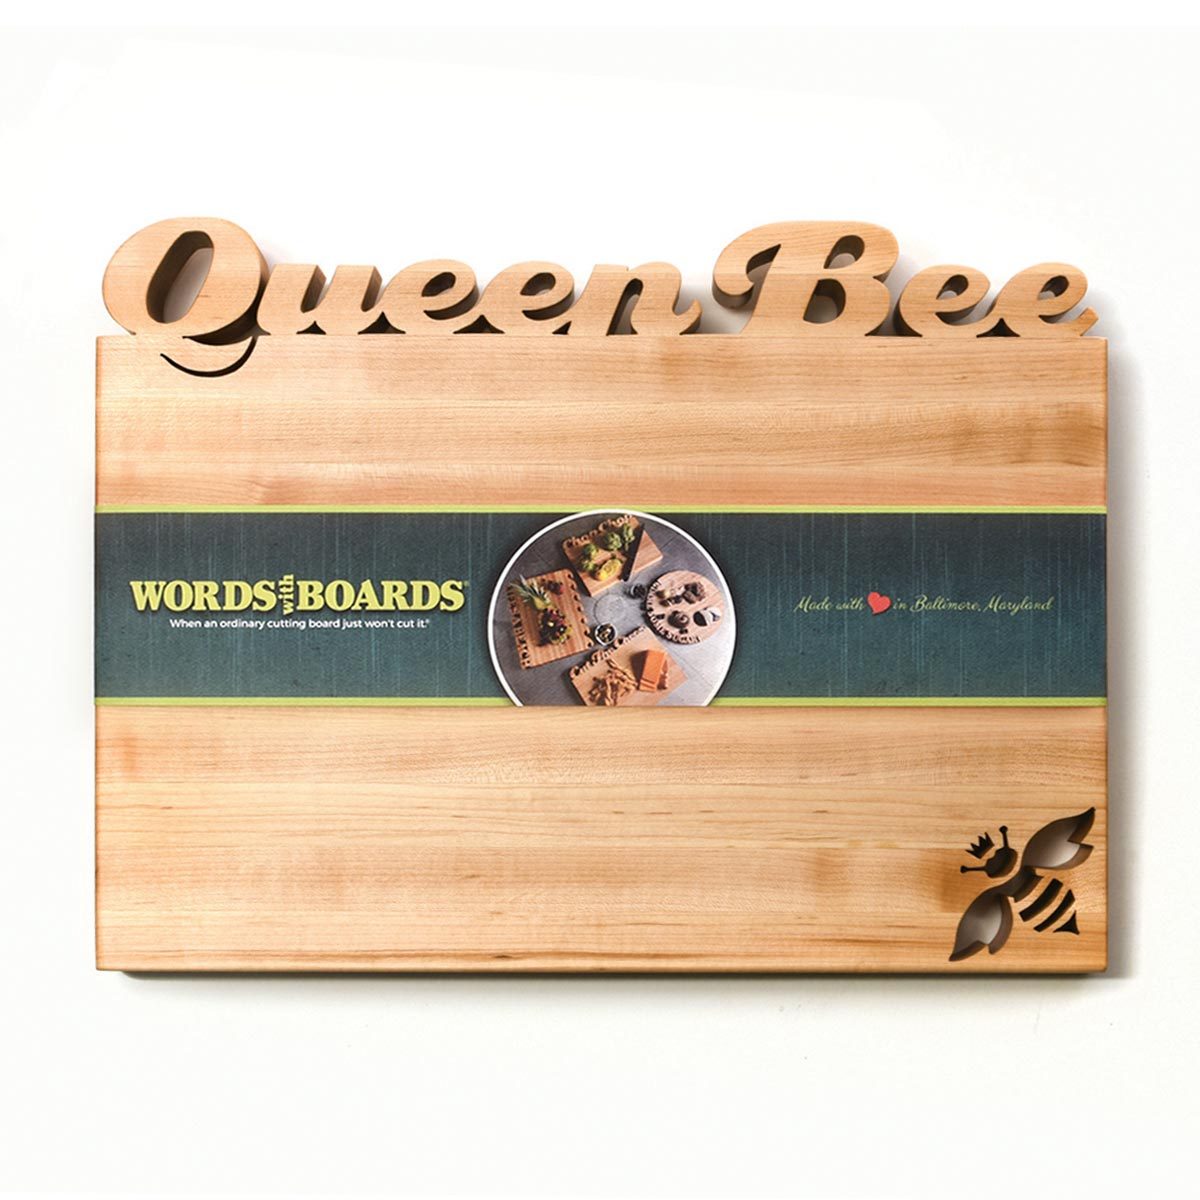 Serving Board ~ Live Like A Queen Bee